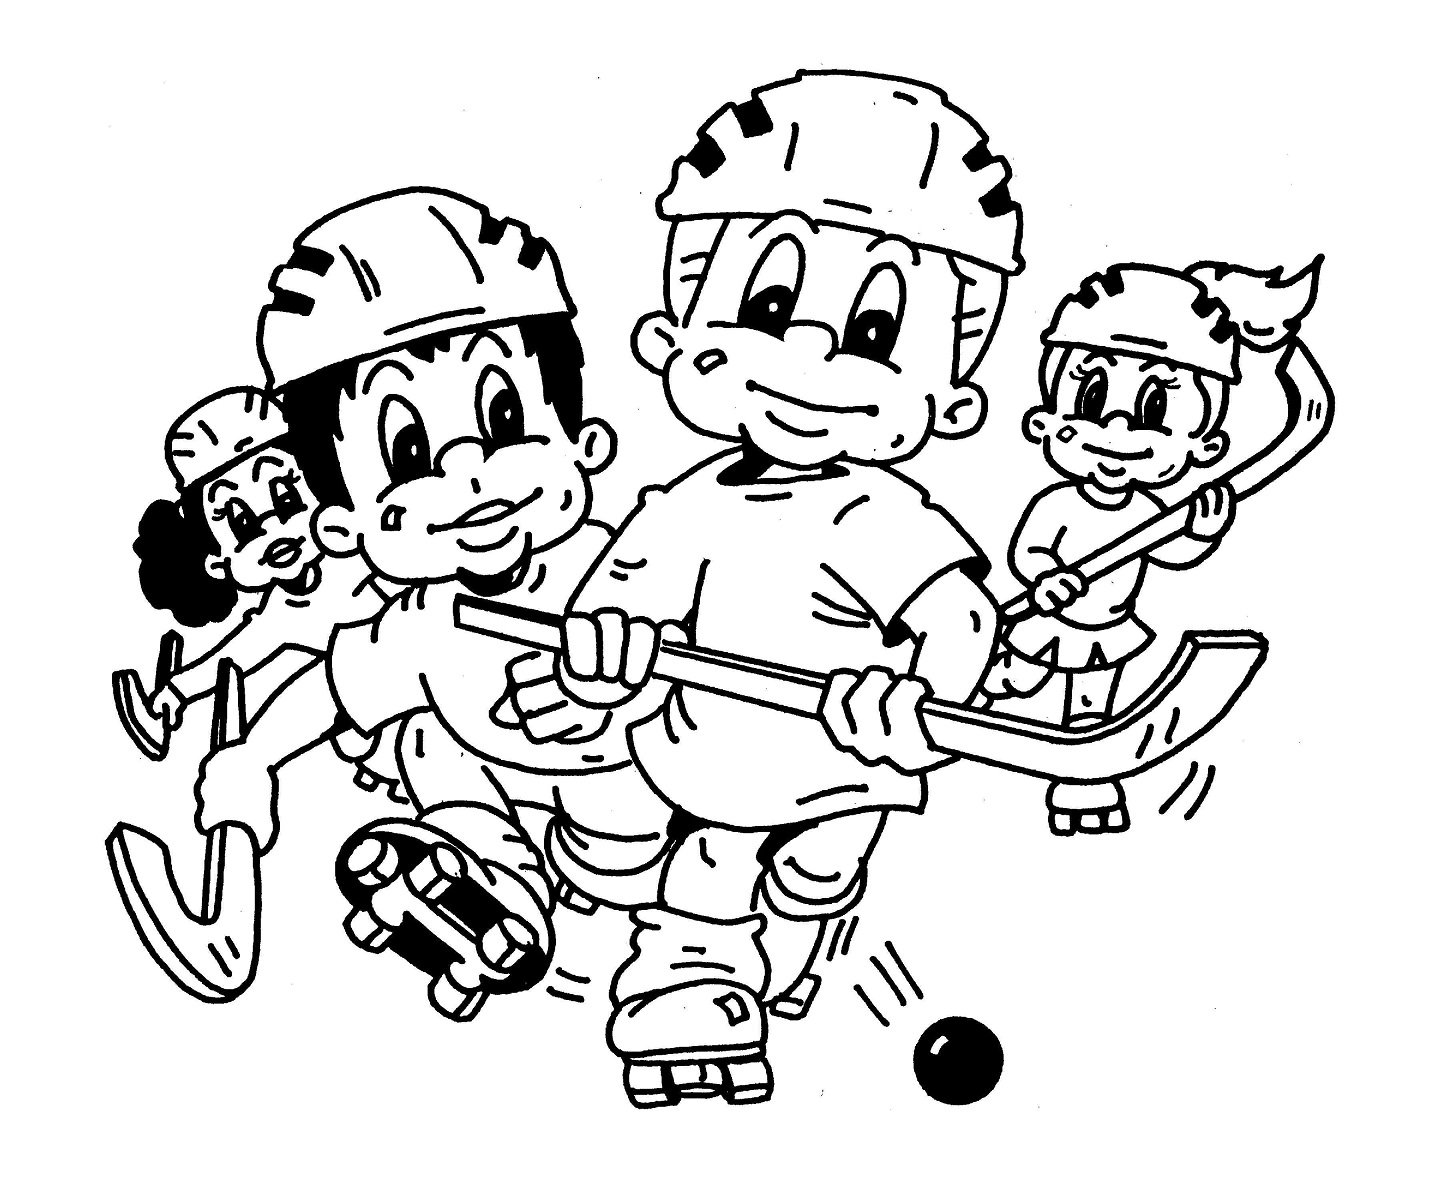 Kids Playing Hockey Coloring Page - Free Printable Coloring Pages for Kids